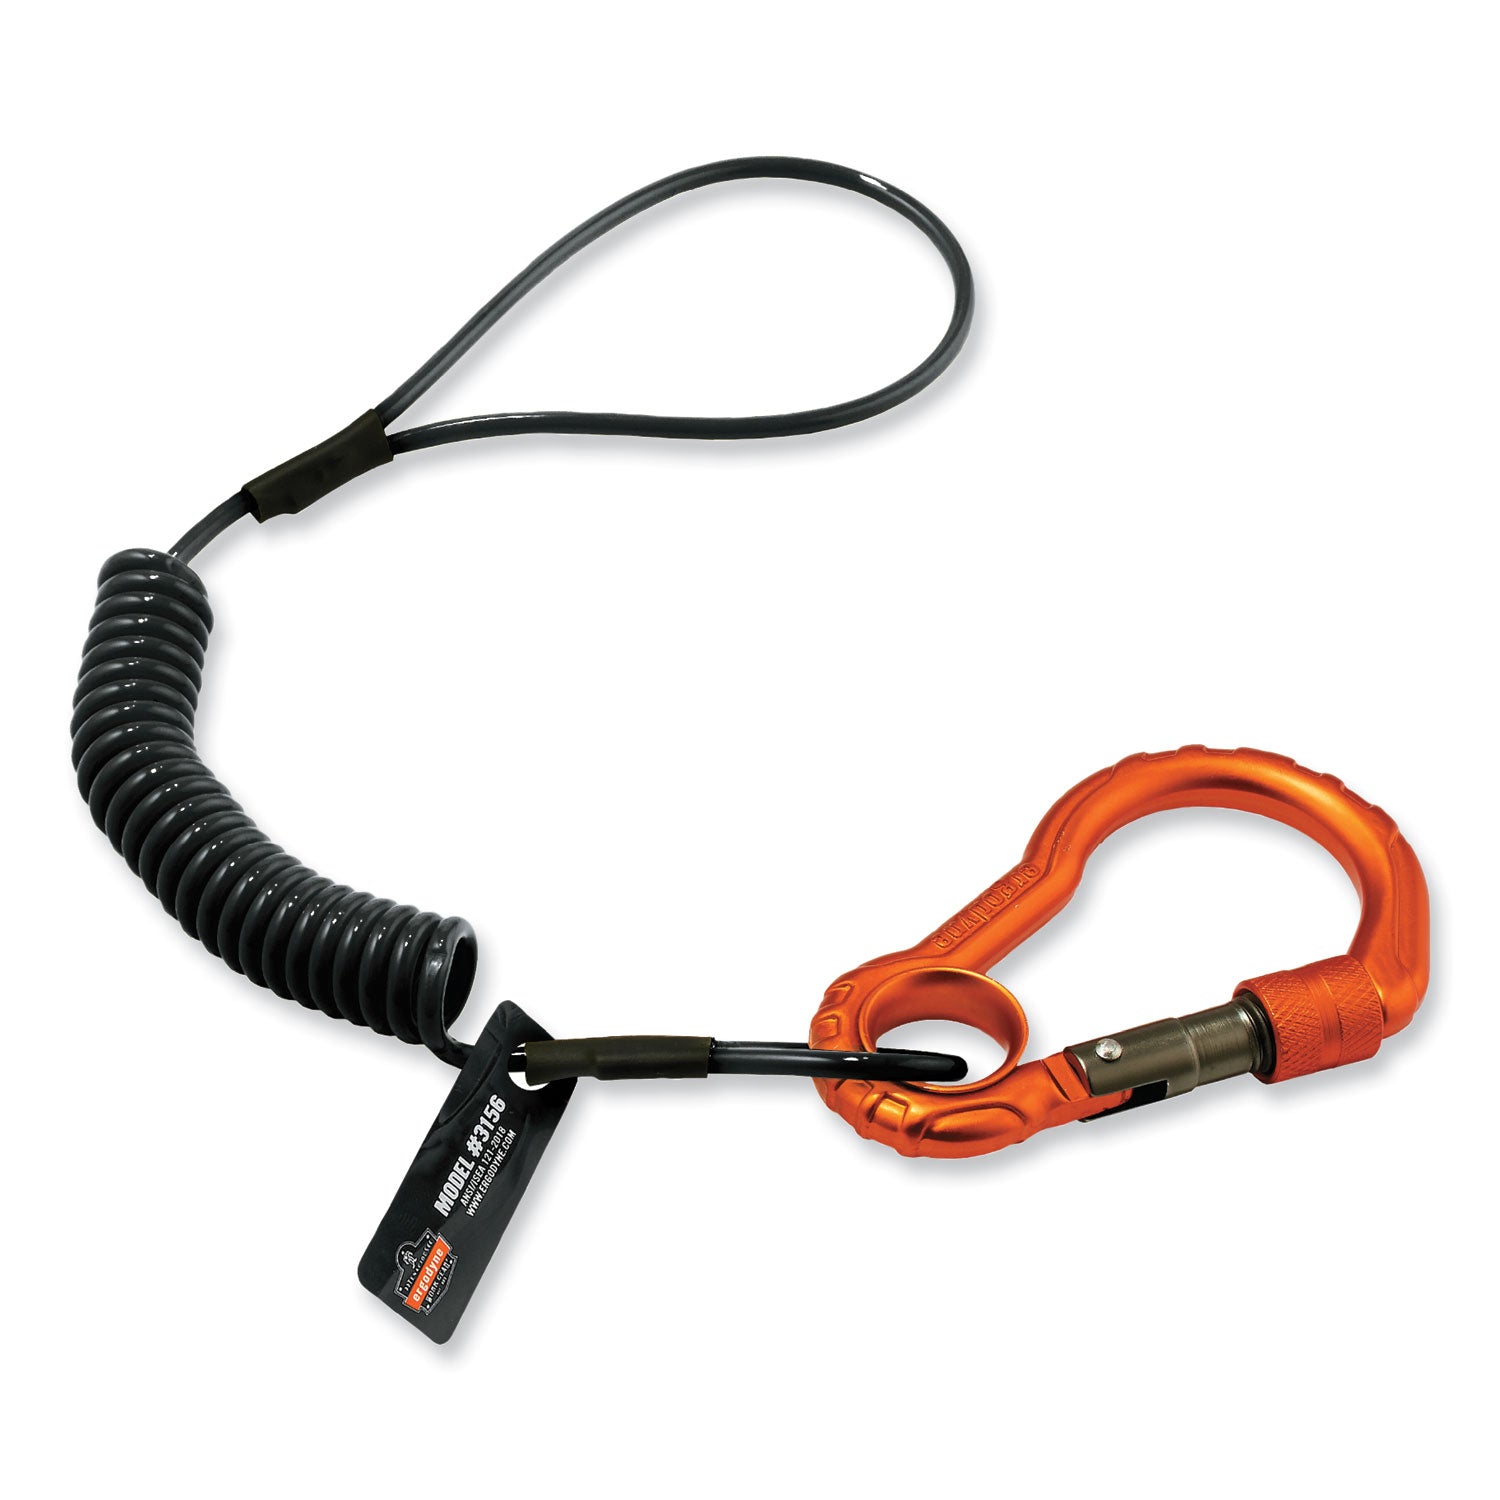 squids-3156-coiled-tool-lanyard-with-carabiner-2-lb-max-work-capacity-12-to-48-black-orange-ships-in-1-3-business-days_ego19161 - 1